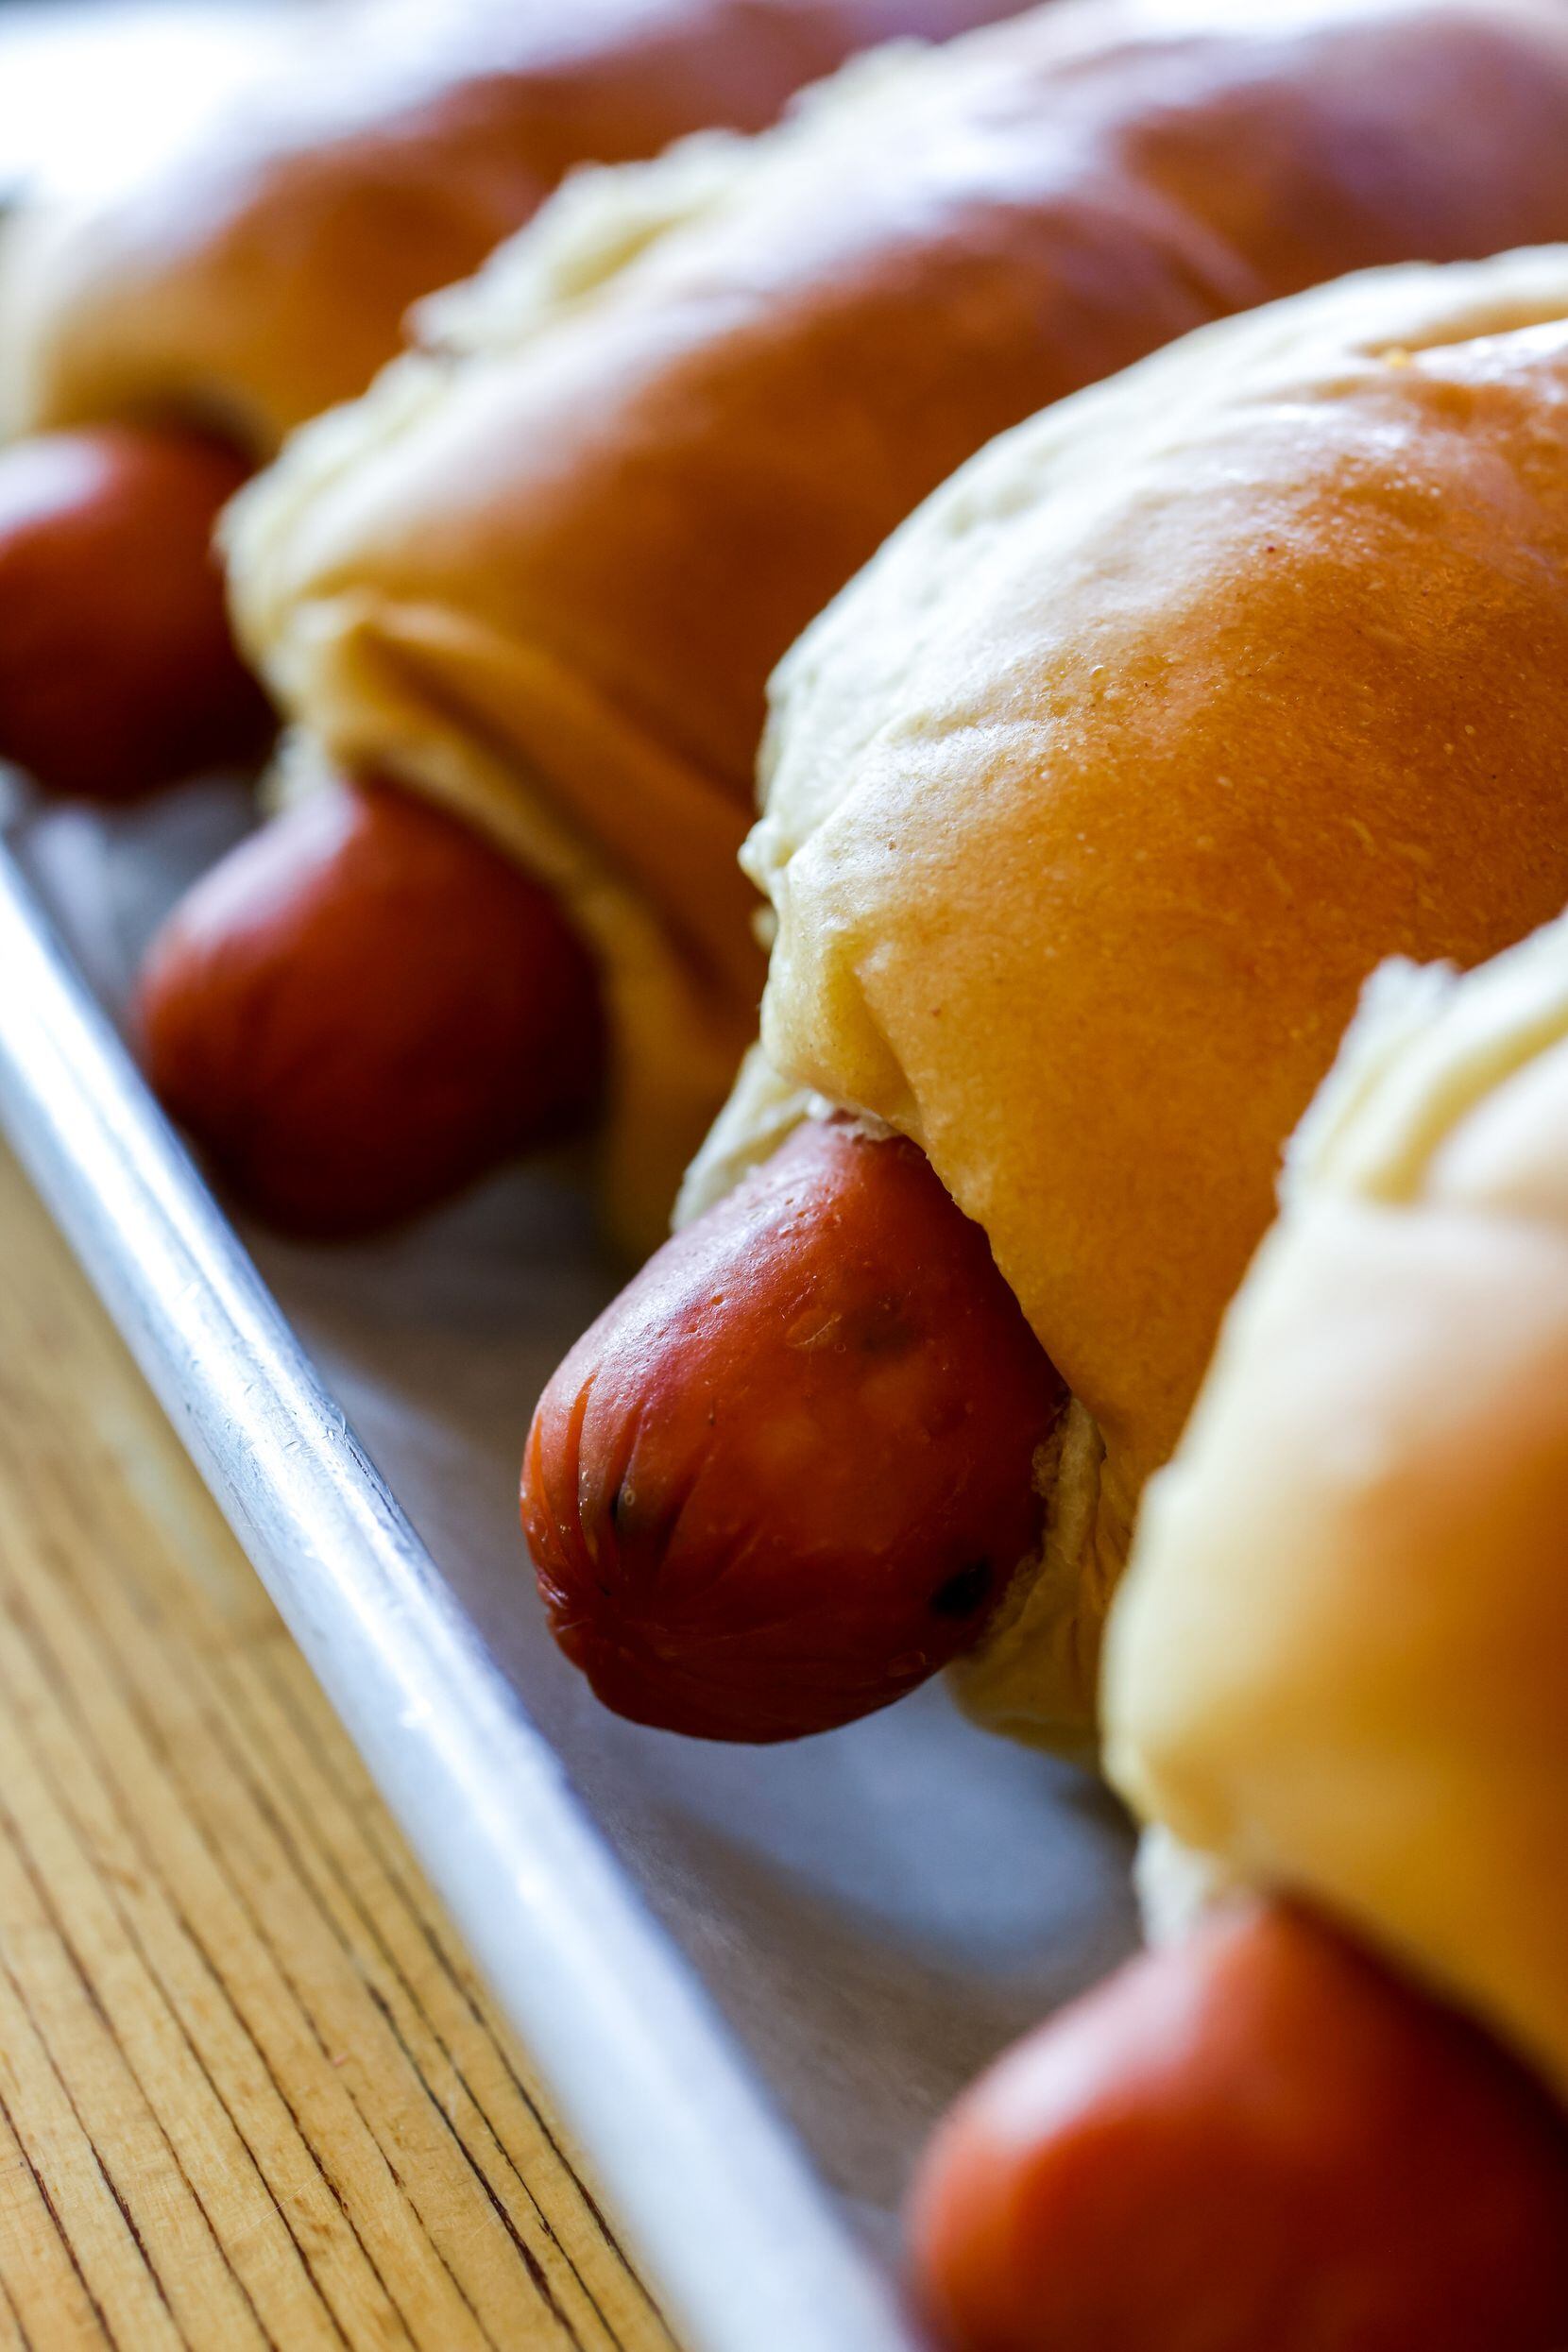 Jalapeño pigs in a blanket are one of the options at Detour Doughnuts in Frisco.